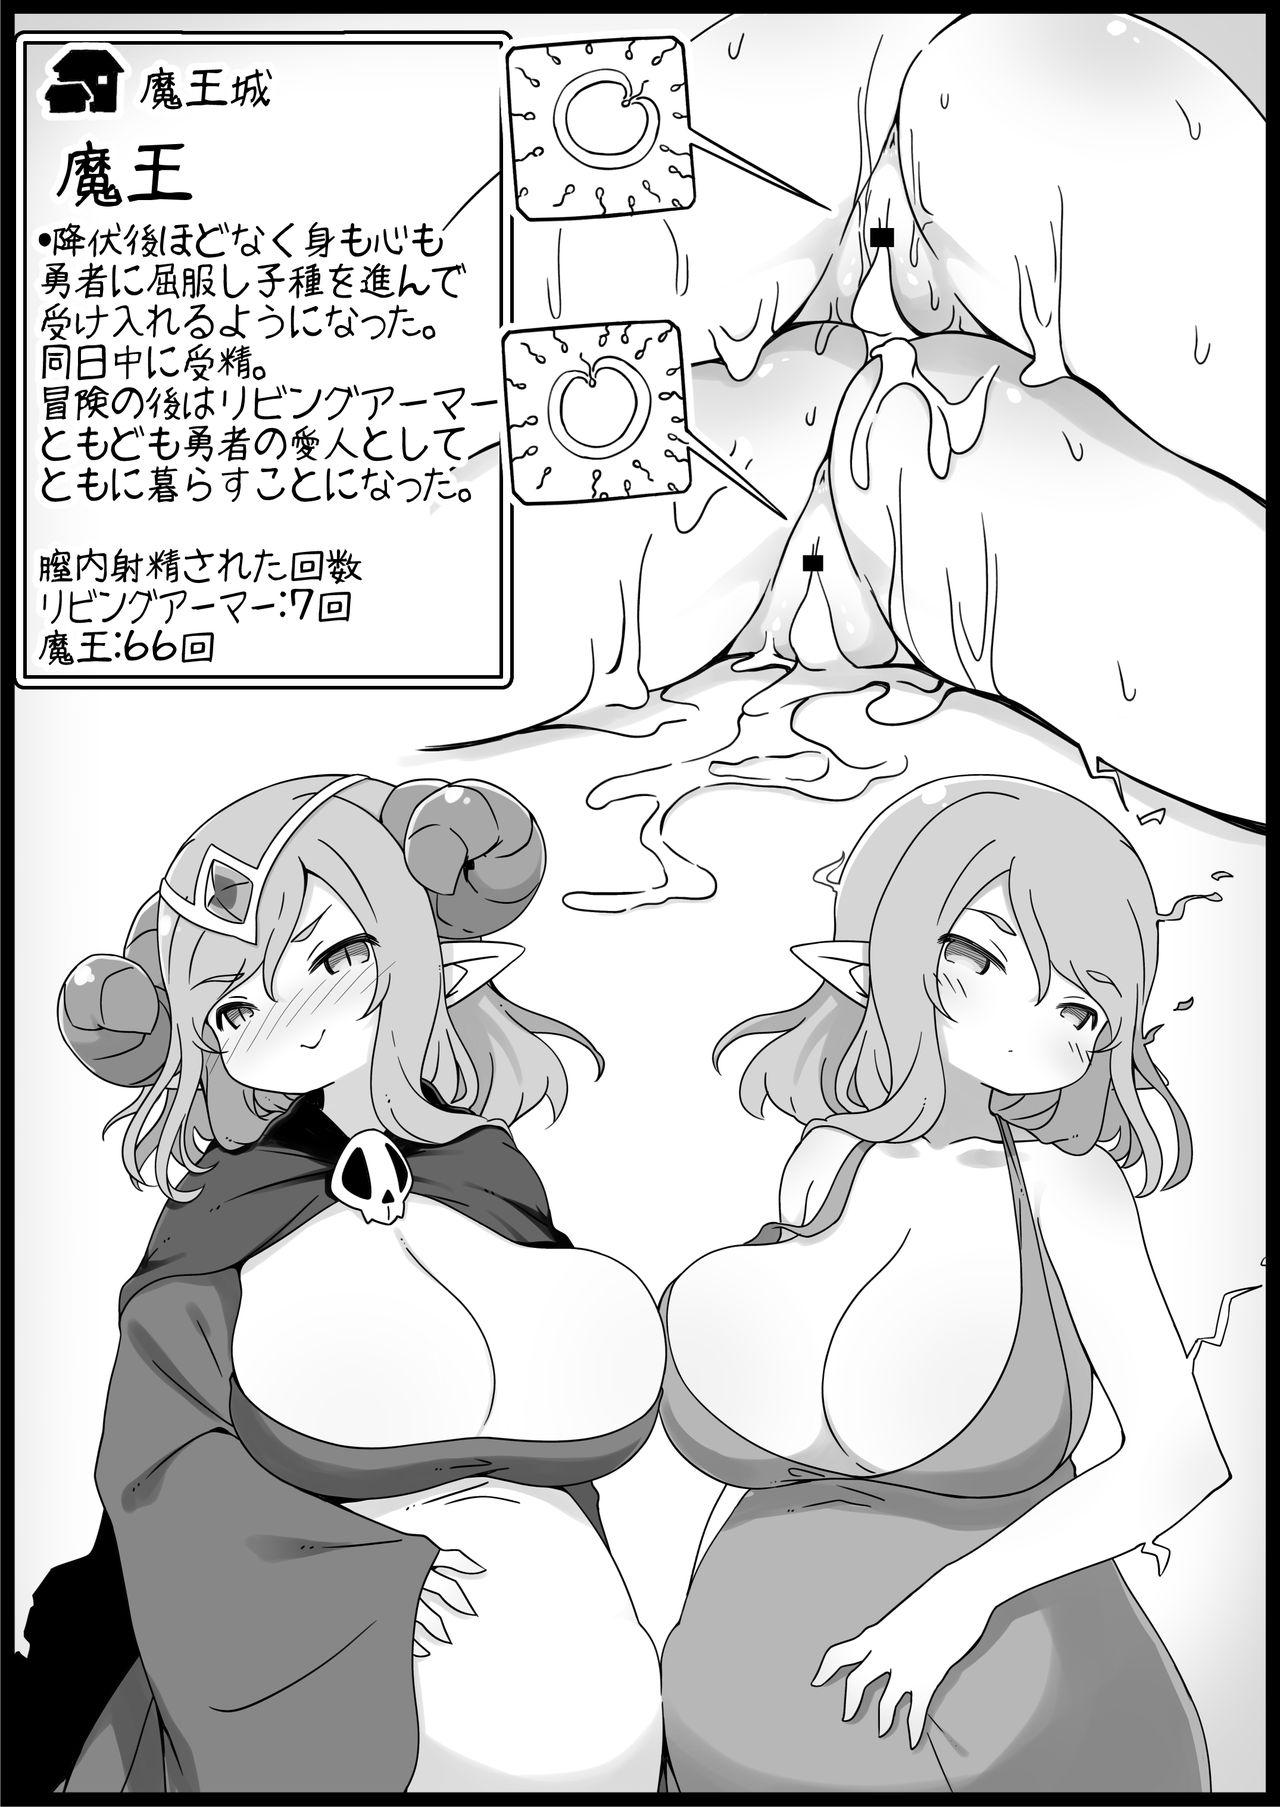 [Succubus Egg] Fantasy World 2 Too Forgiving to Heroes-Continued NPC (mob) Opponent-Centered Short H Manga Collection- 54